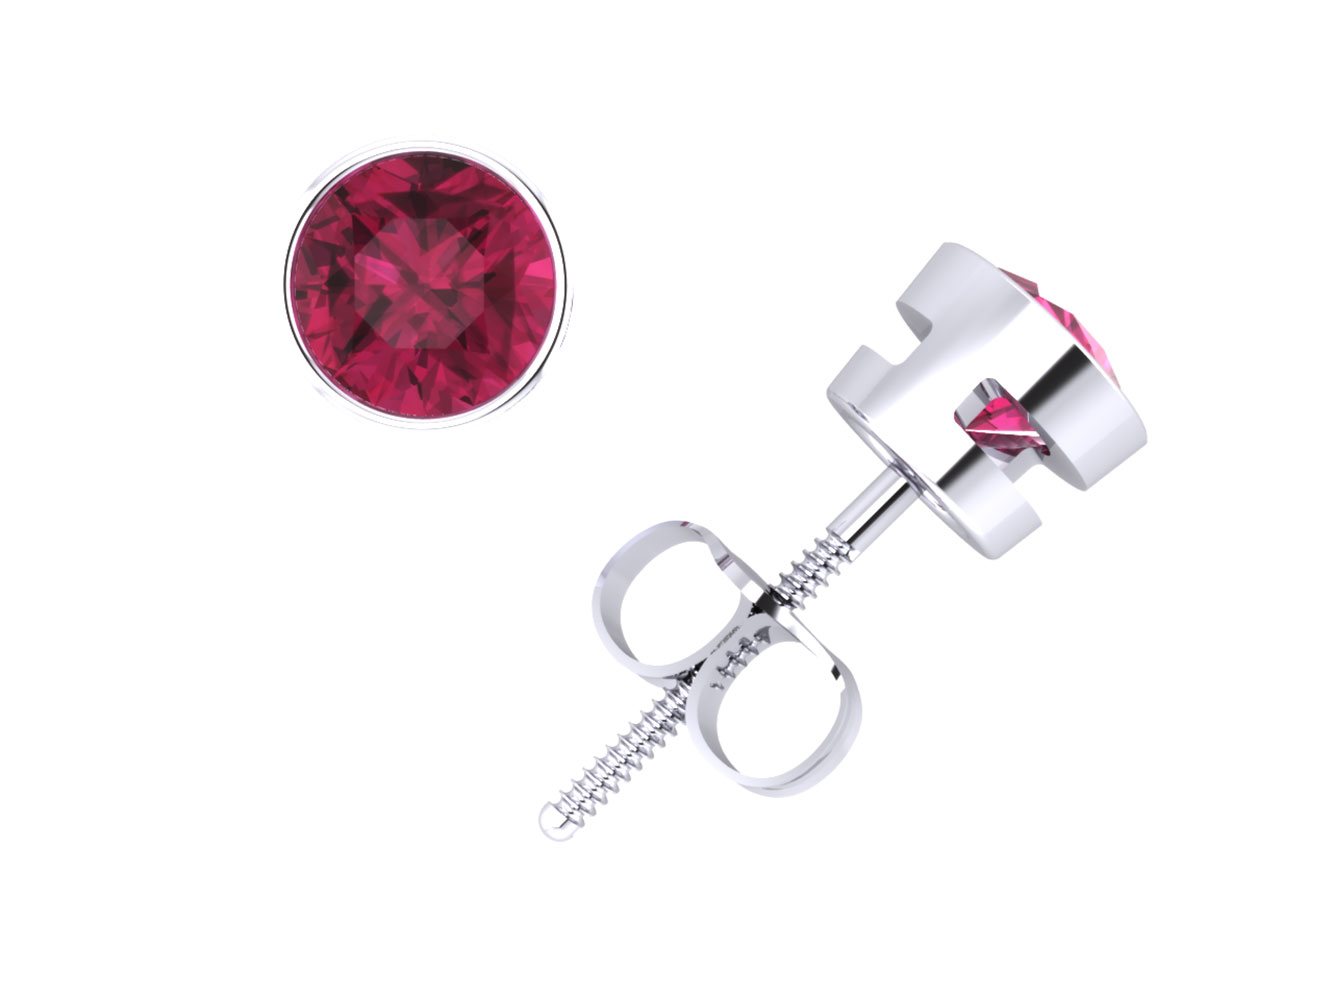 Jewel We Sell Natural 0.40Ct Round Pink Sapphire Stud Earrings 14k White or Yellow Gold Bezel Screwback Commercial Quality